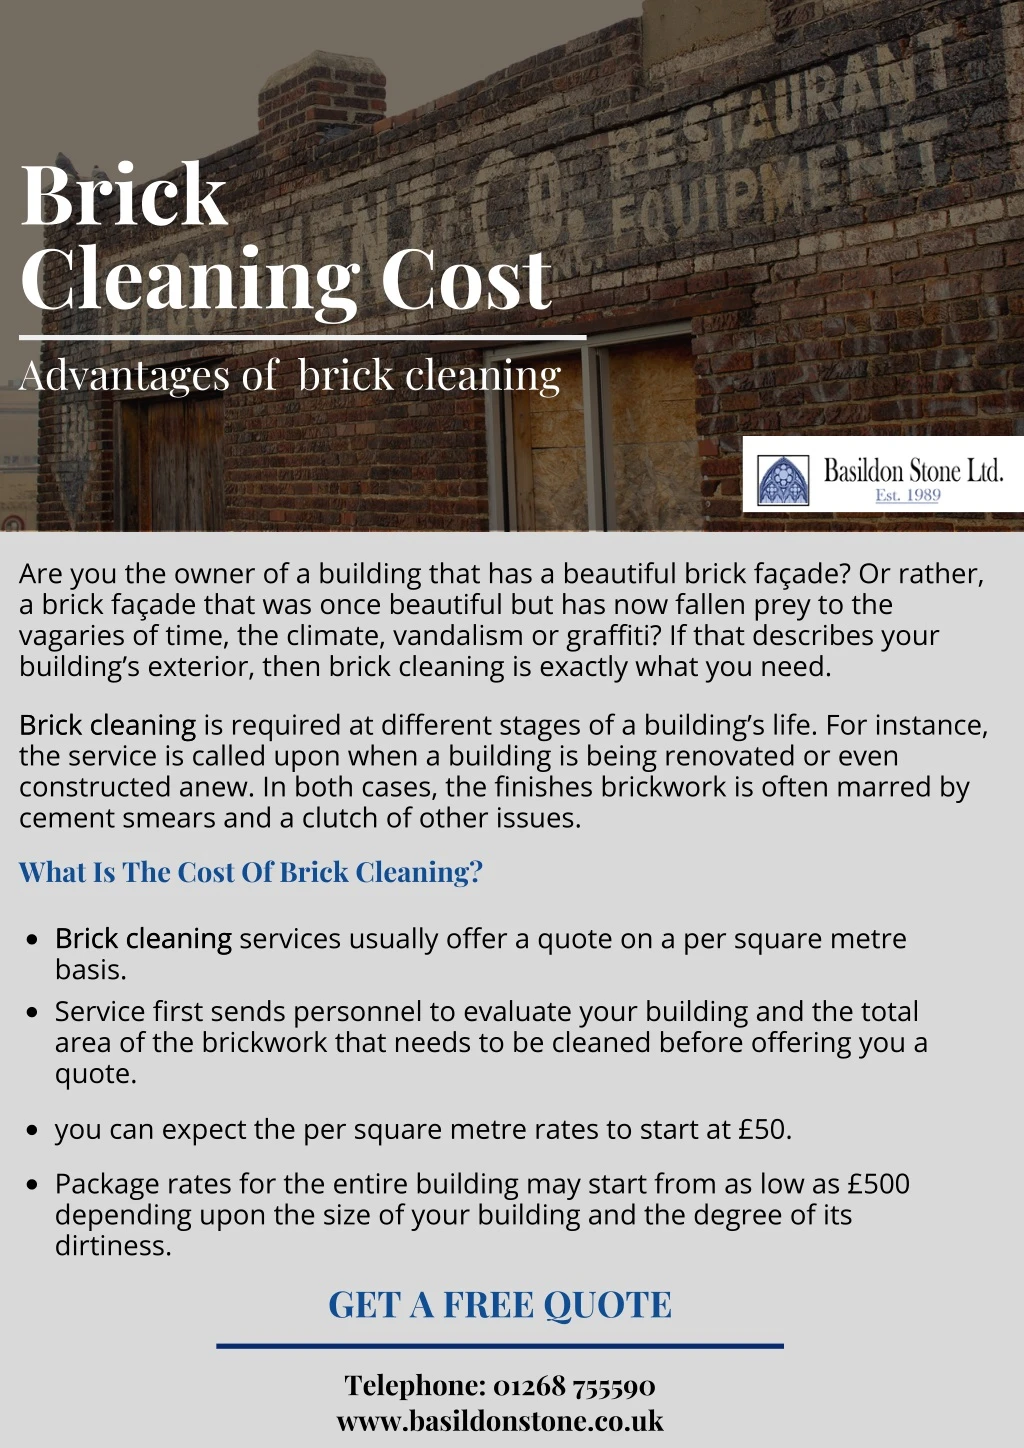 brick cleaning cost advantages of brick cleaning